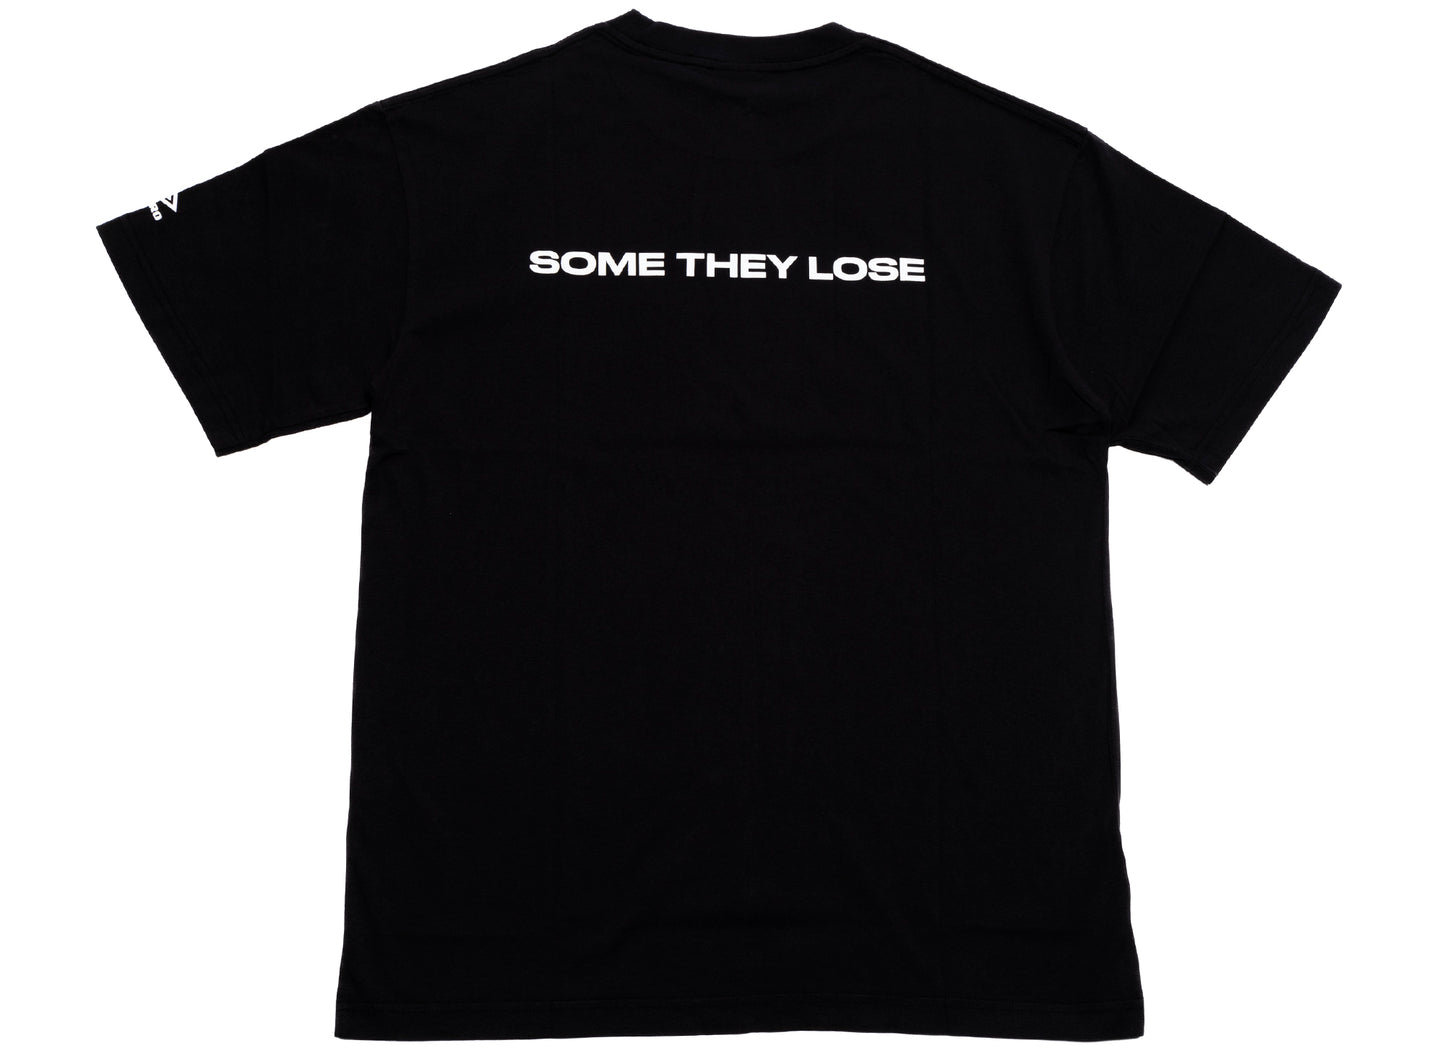 Umbro Penalty Culture Some They Win Tee in Black xld